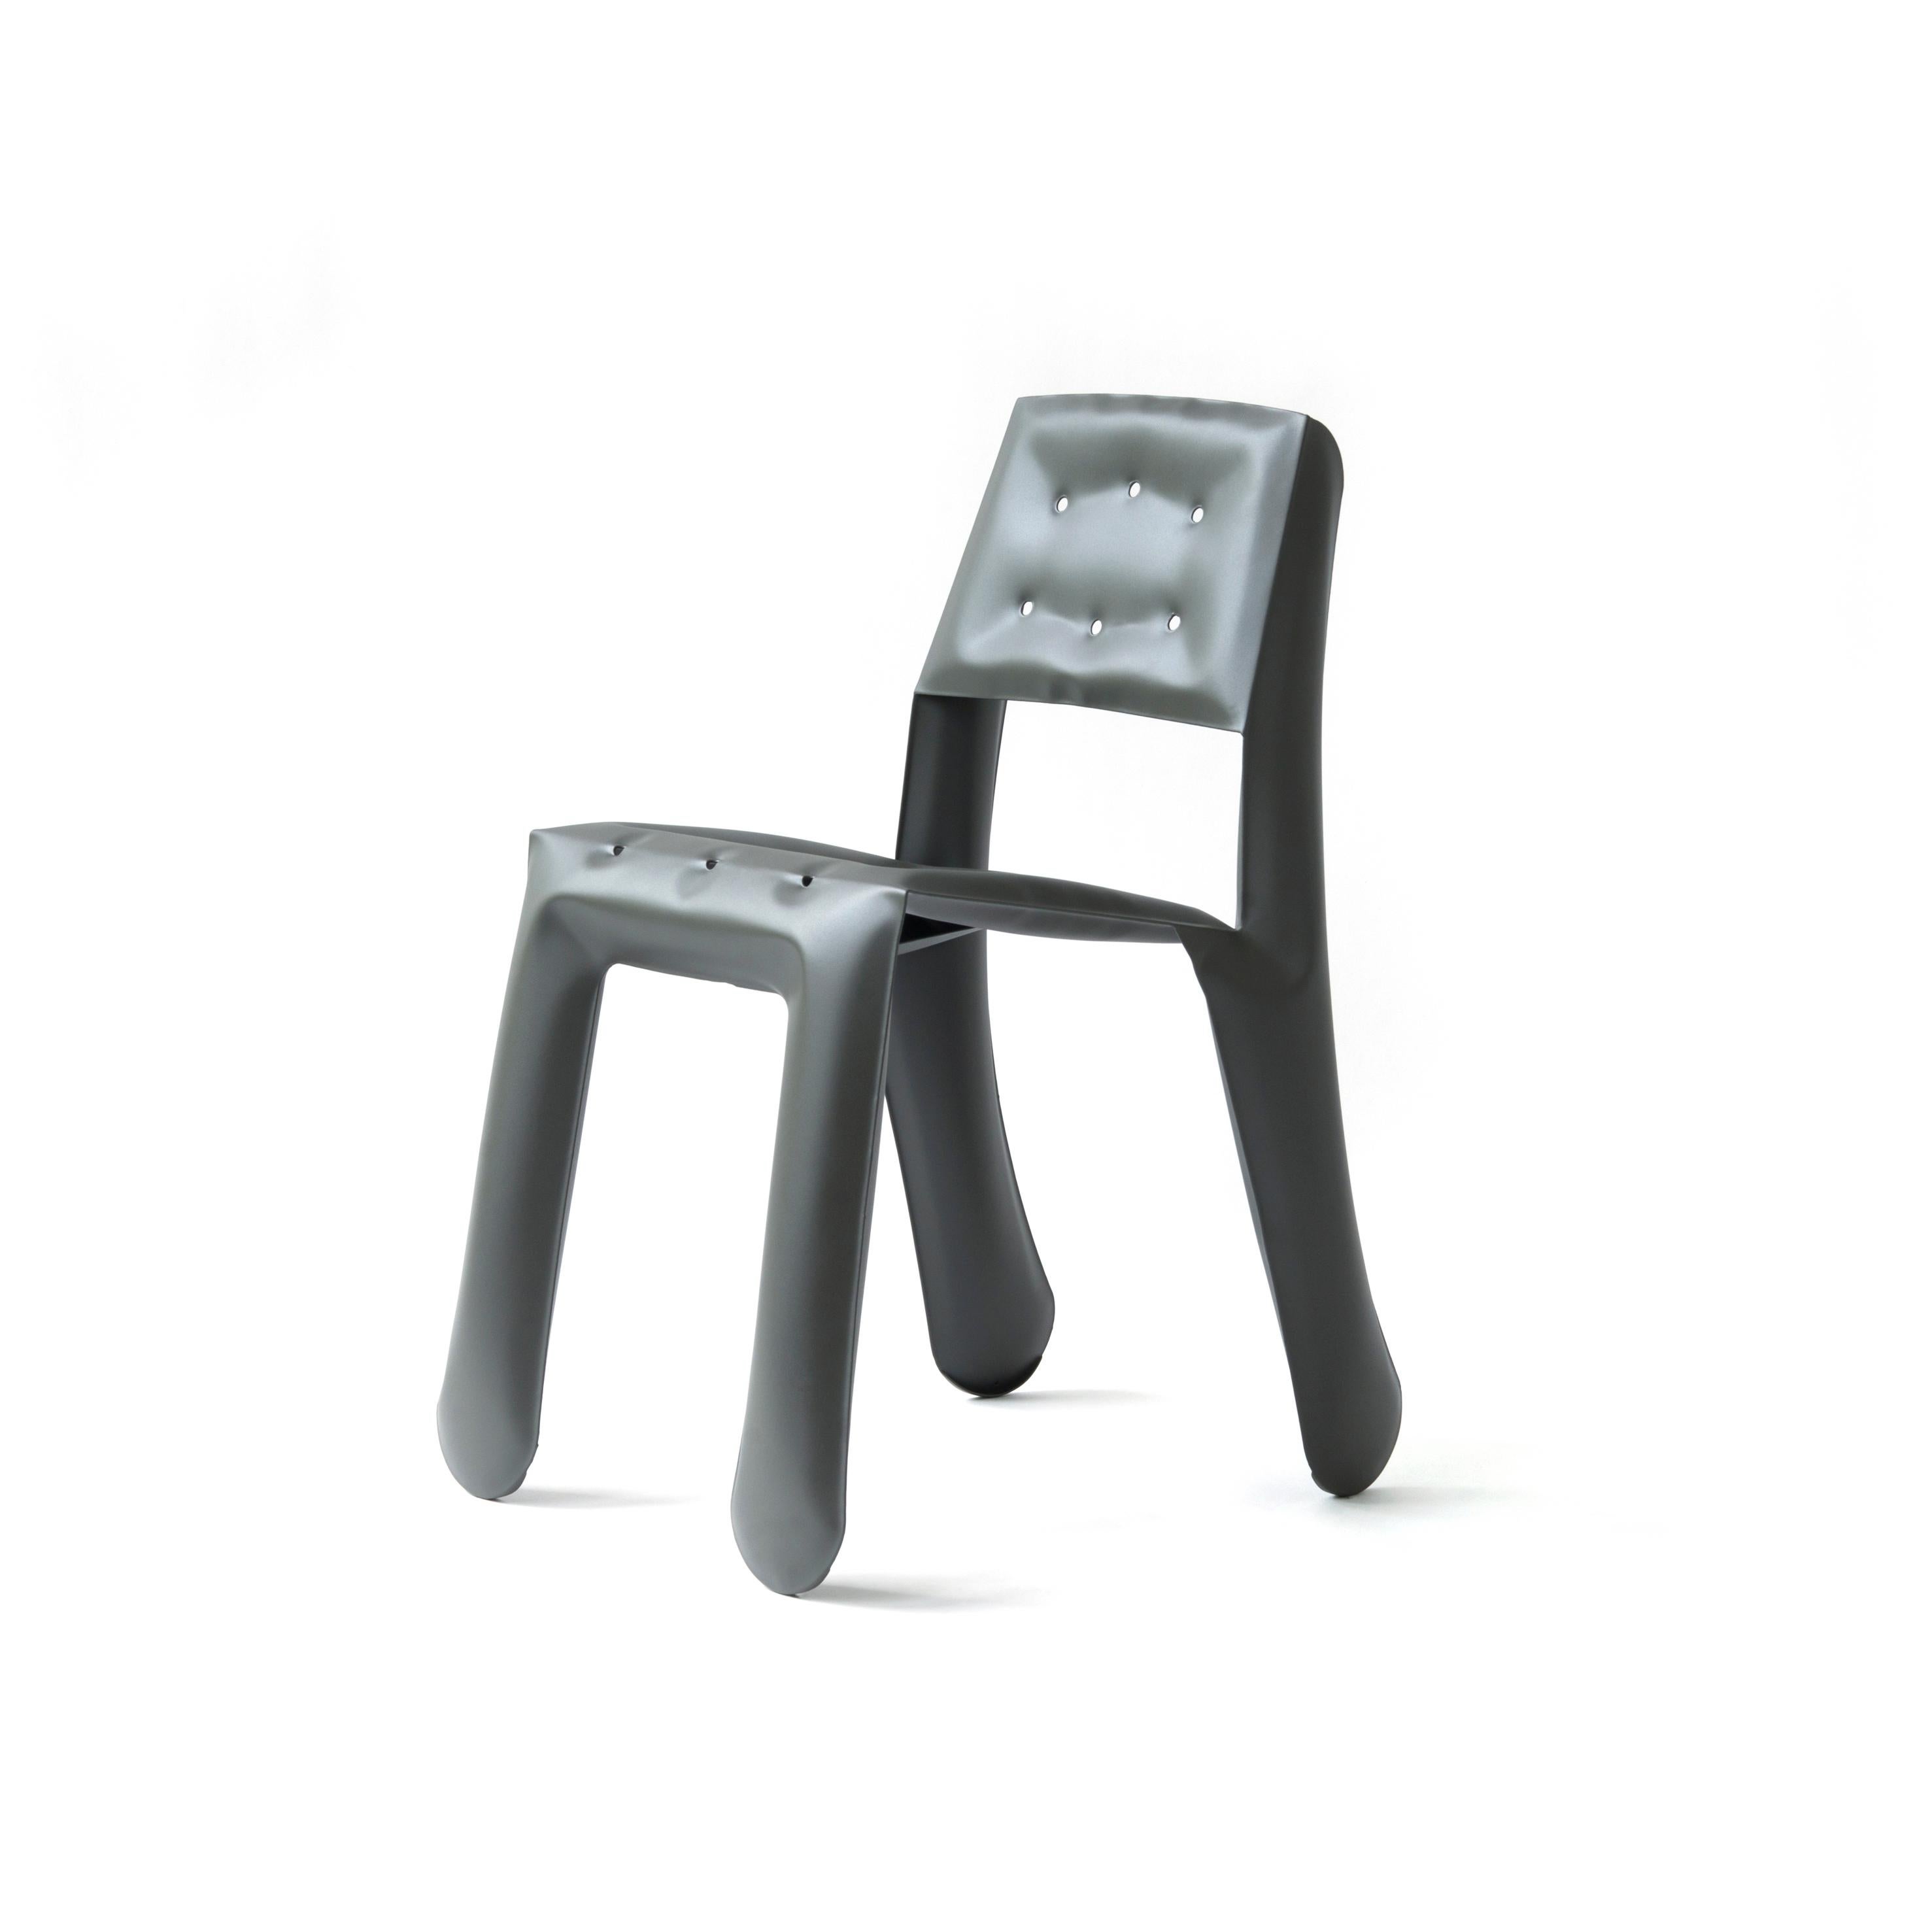 Umbra Grey Carbon Steel Chippensteel 0.5 Sculptural Chair by Zieta
Dimensions: D 58 x W 46 x H 80 cm 
Material: Carbon steel. 
Finish: Powder-coated. Matt finish. 
Also available in colors: white matt, beige, black, blue-gray, graphite, moss-gray,